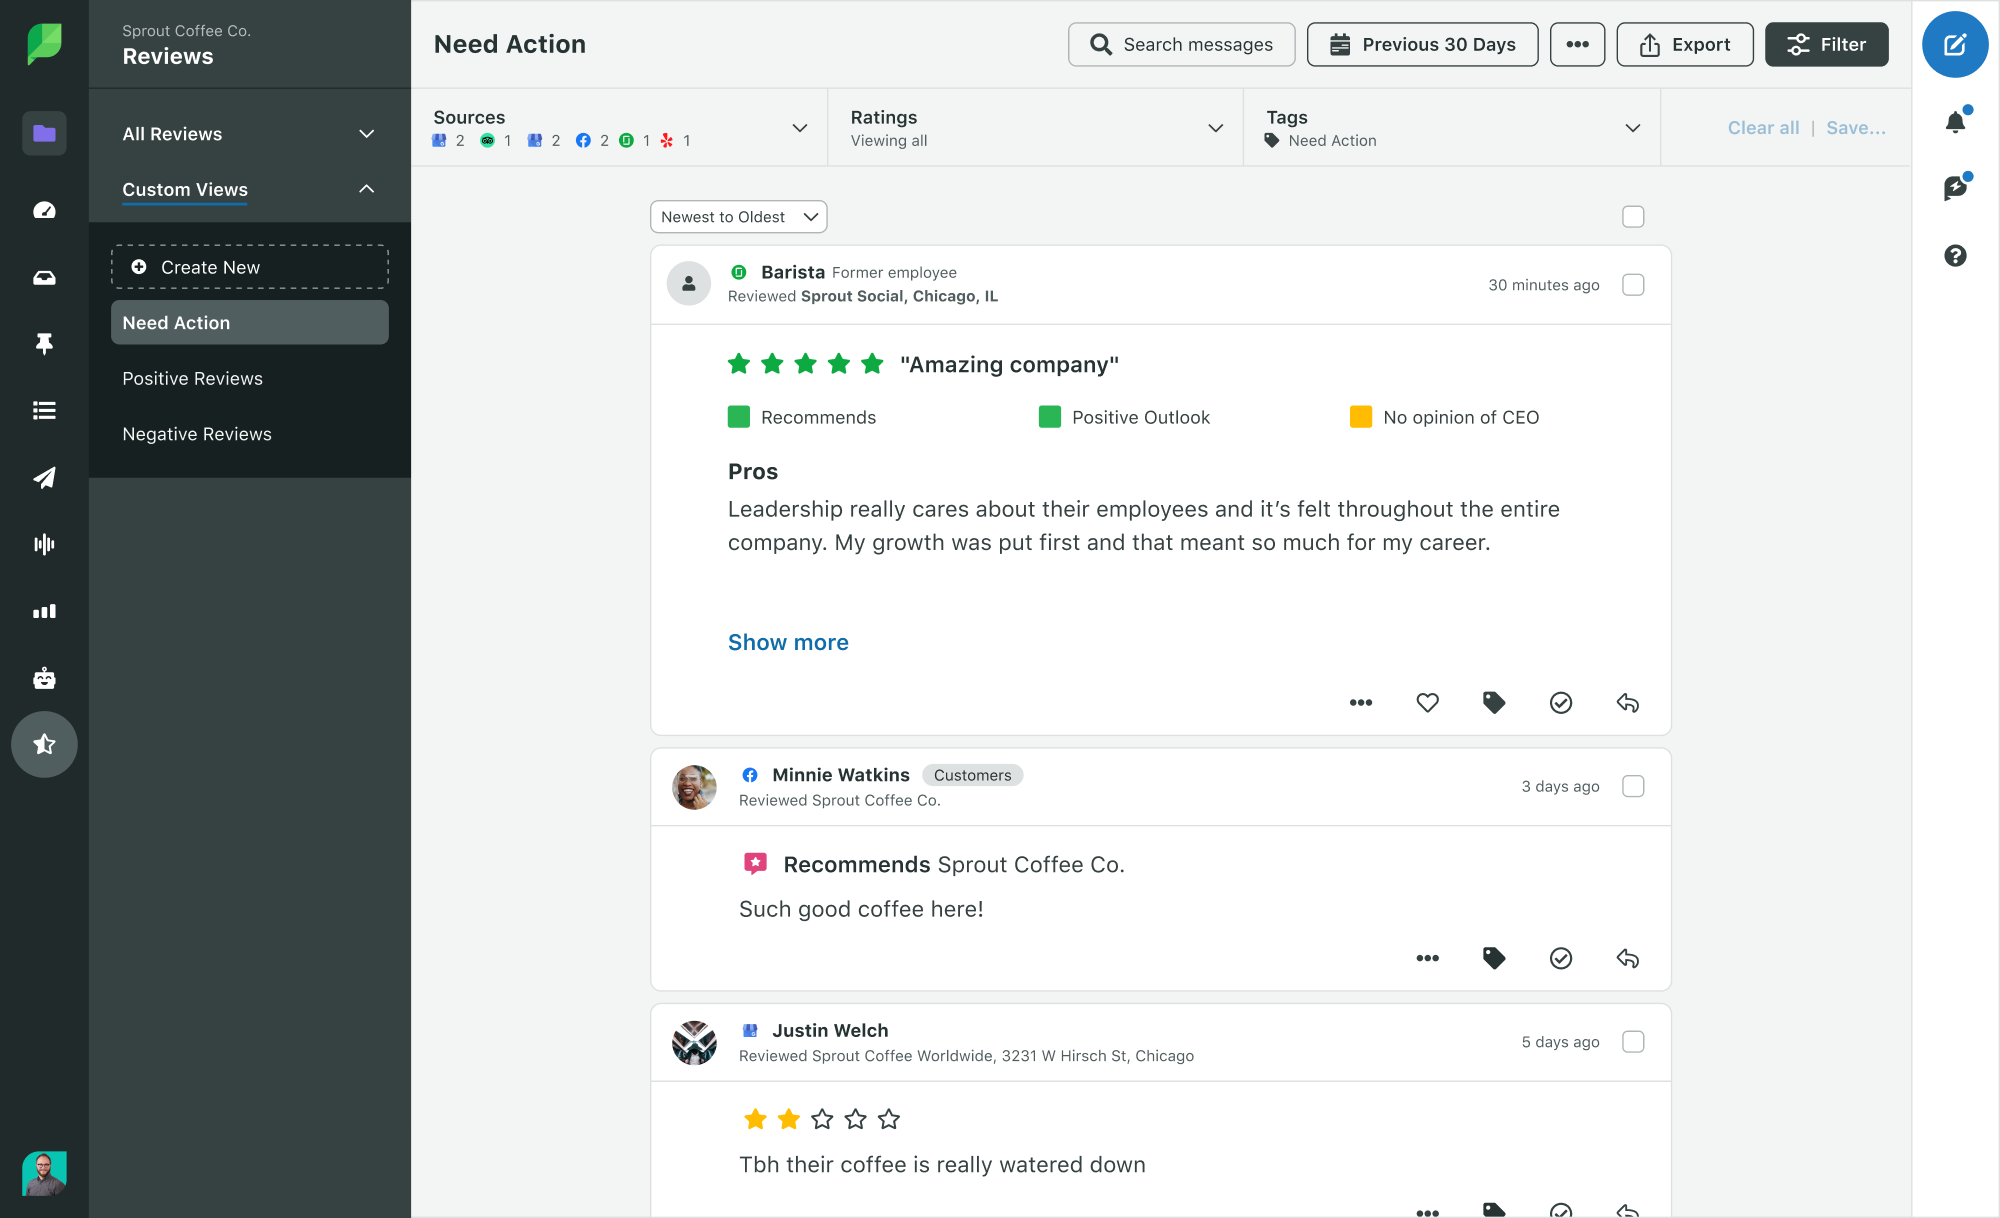 A screenshot of the Sprout Social platform that demonstrates reviews aggregated from multiple review sites in one unified feed.